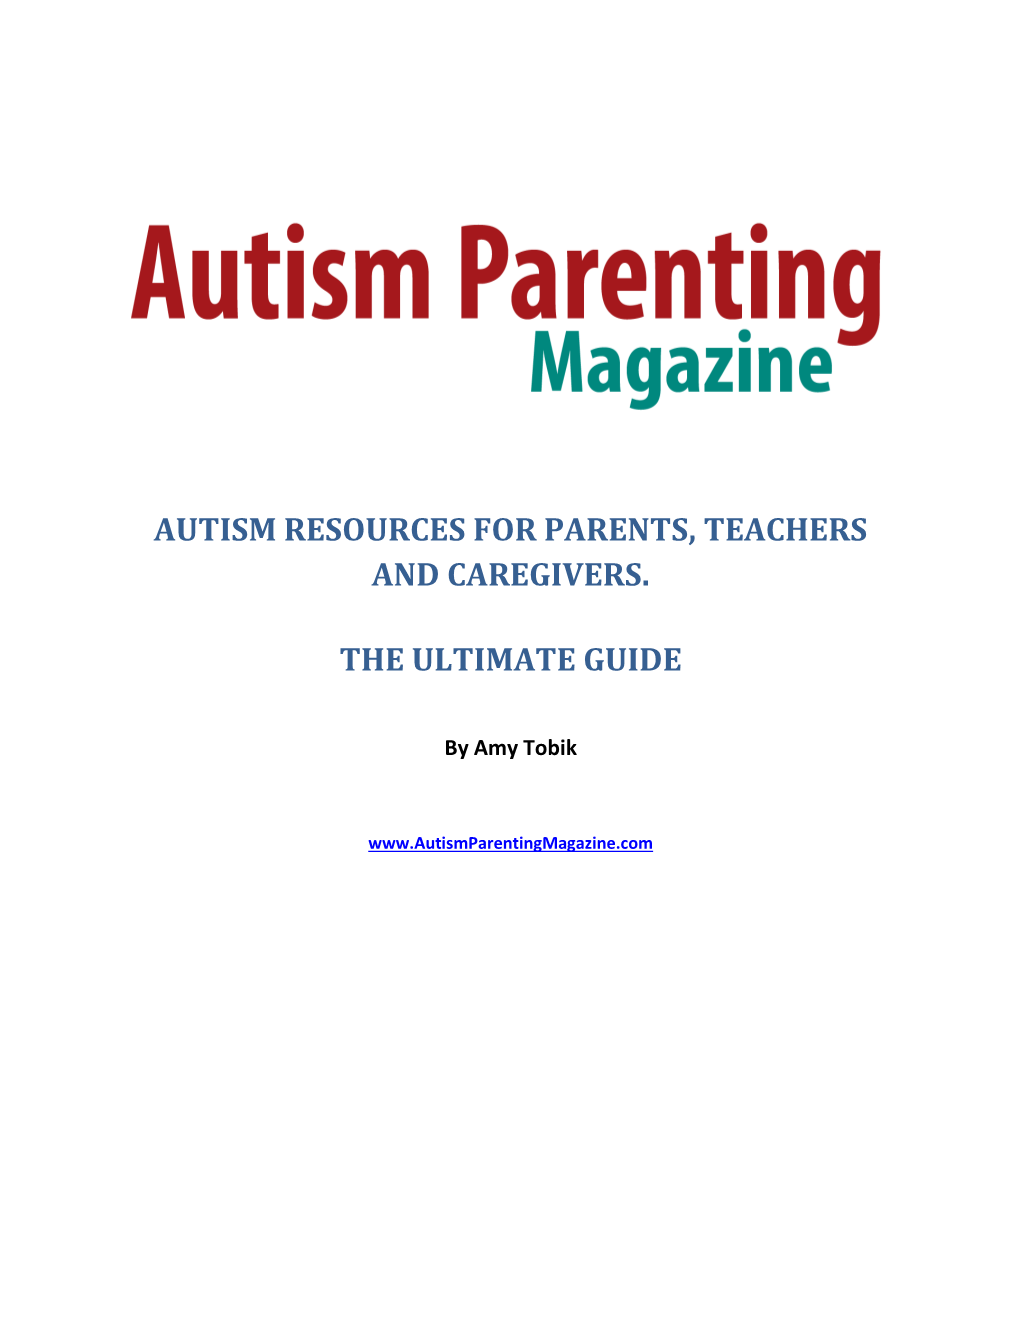 Autism Resources for Parents, Teachers and Caregivers. the Ultimate Guide